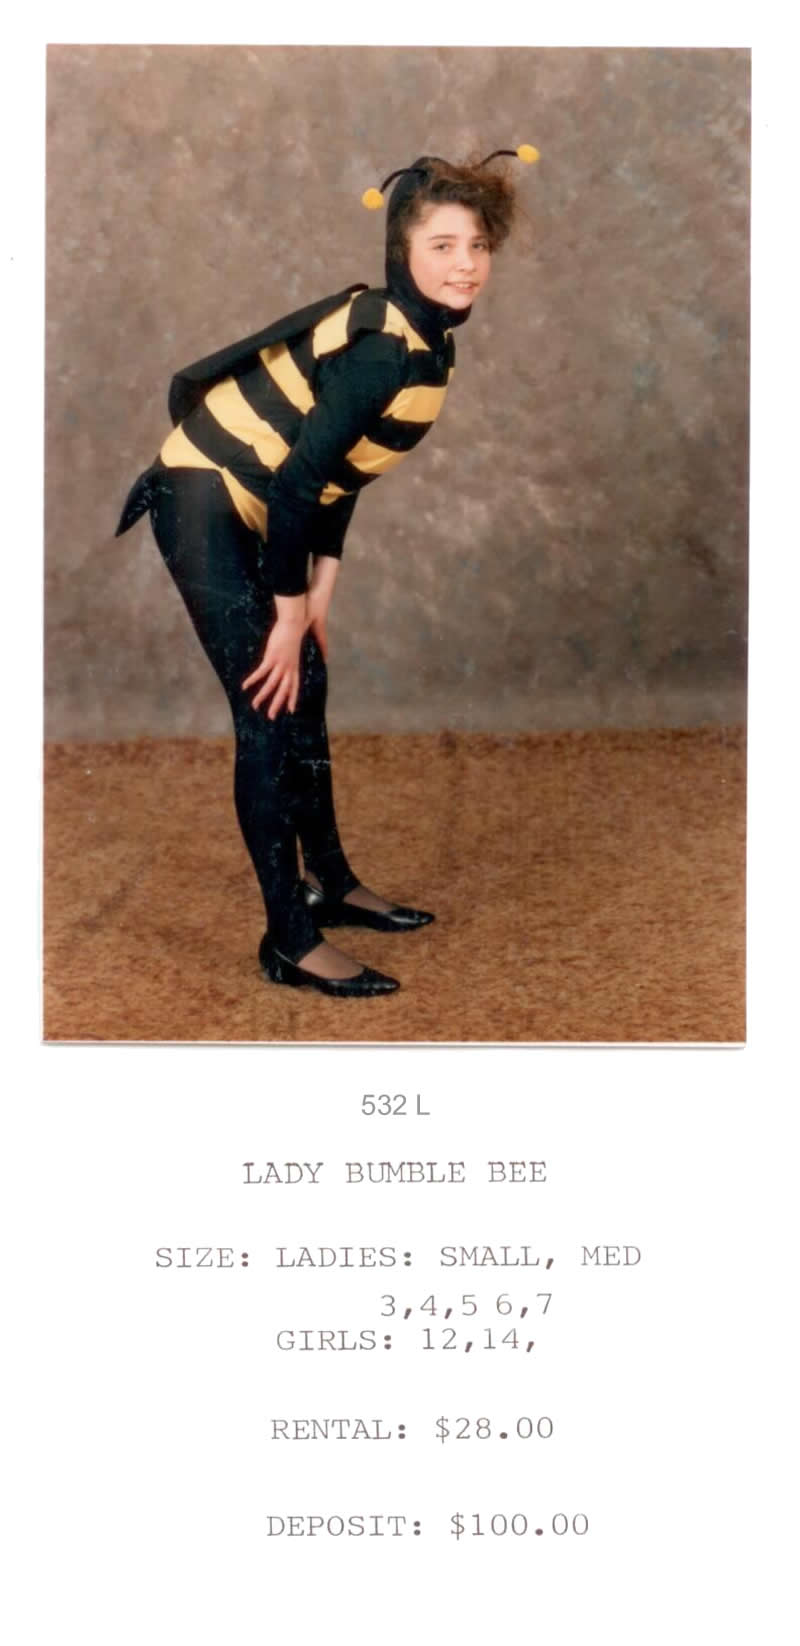 LADY BUMBLE BEE